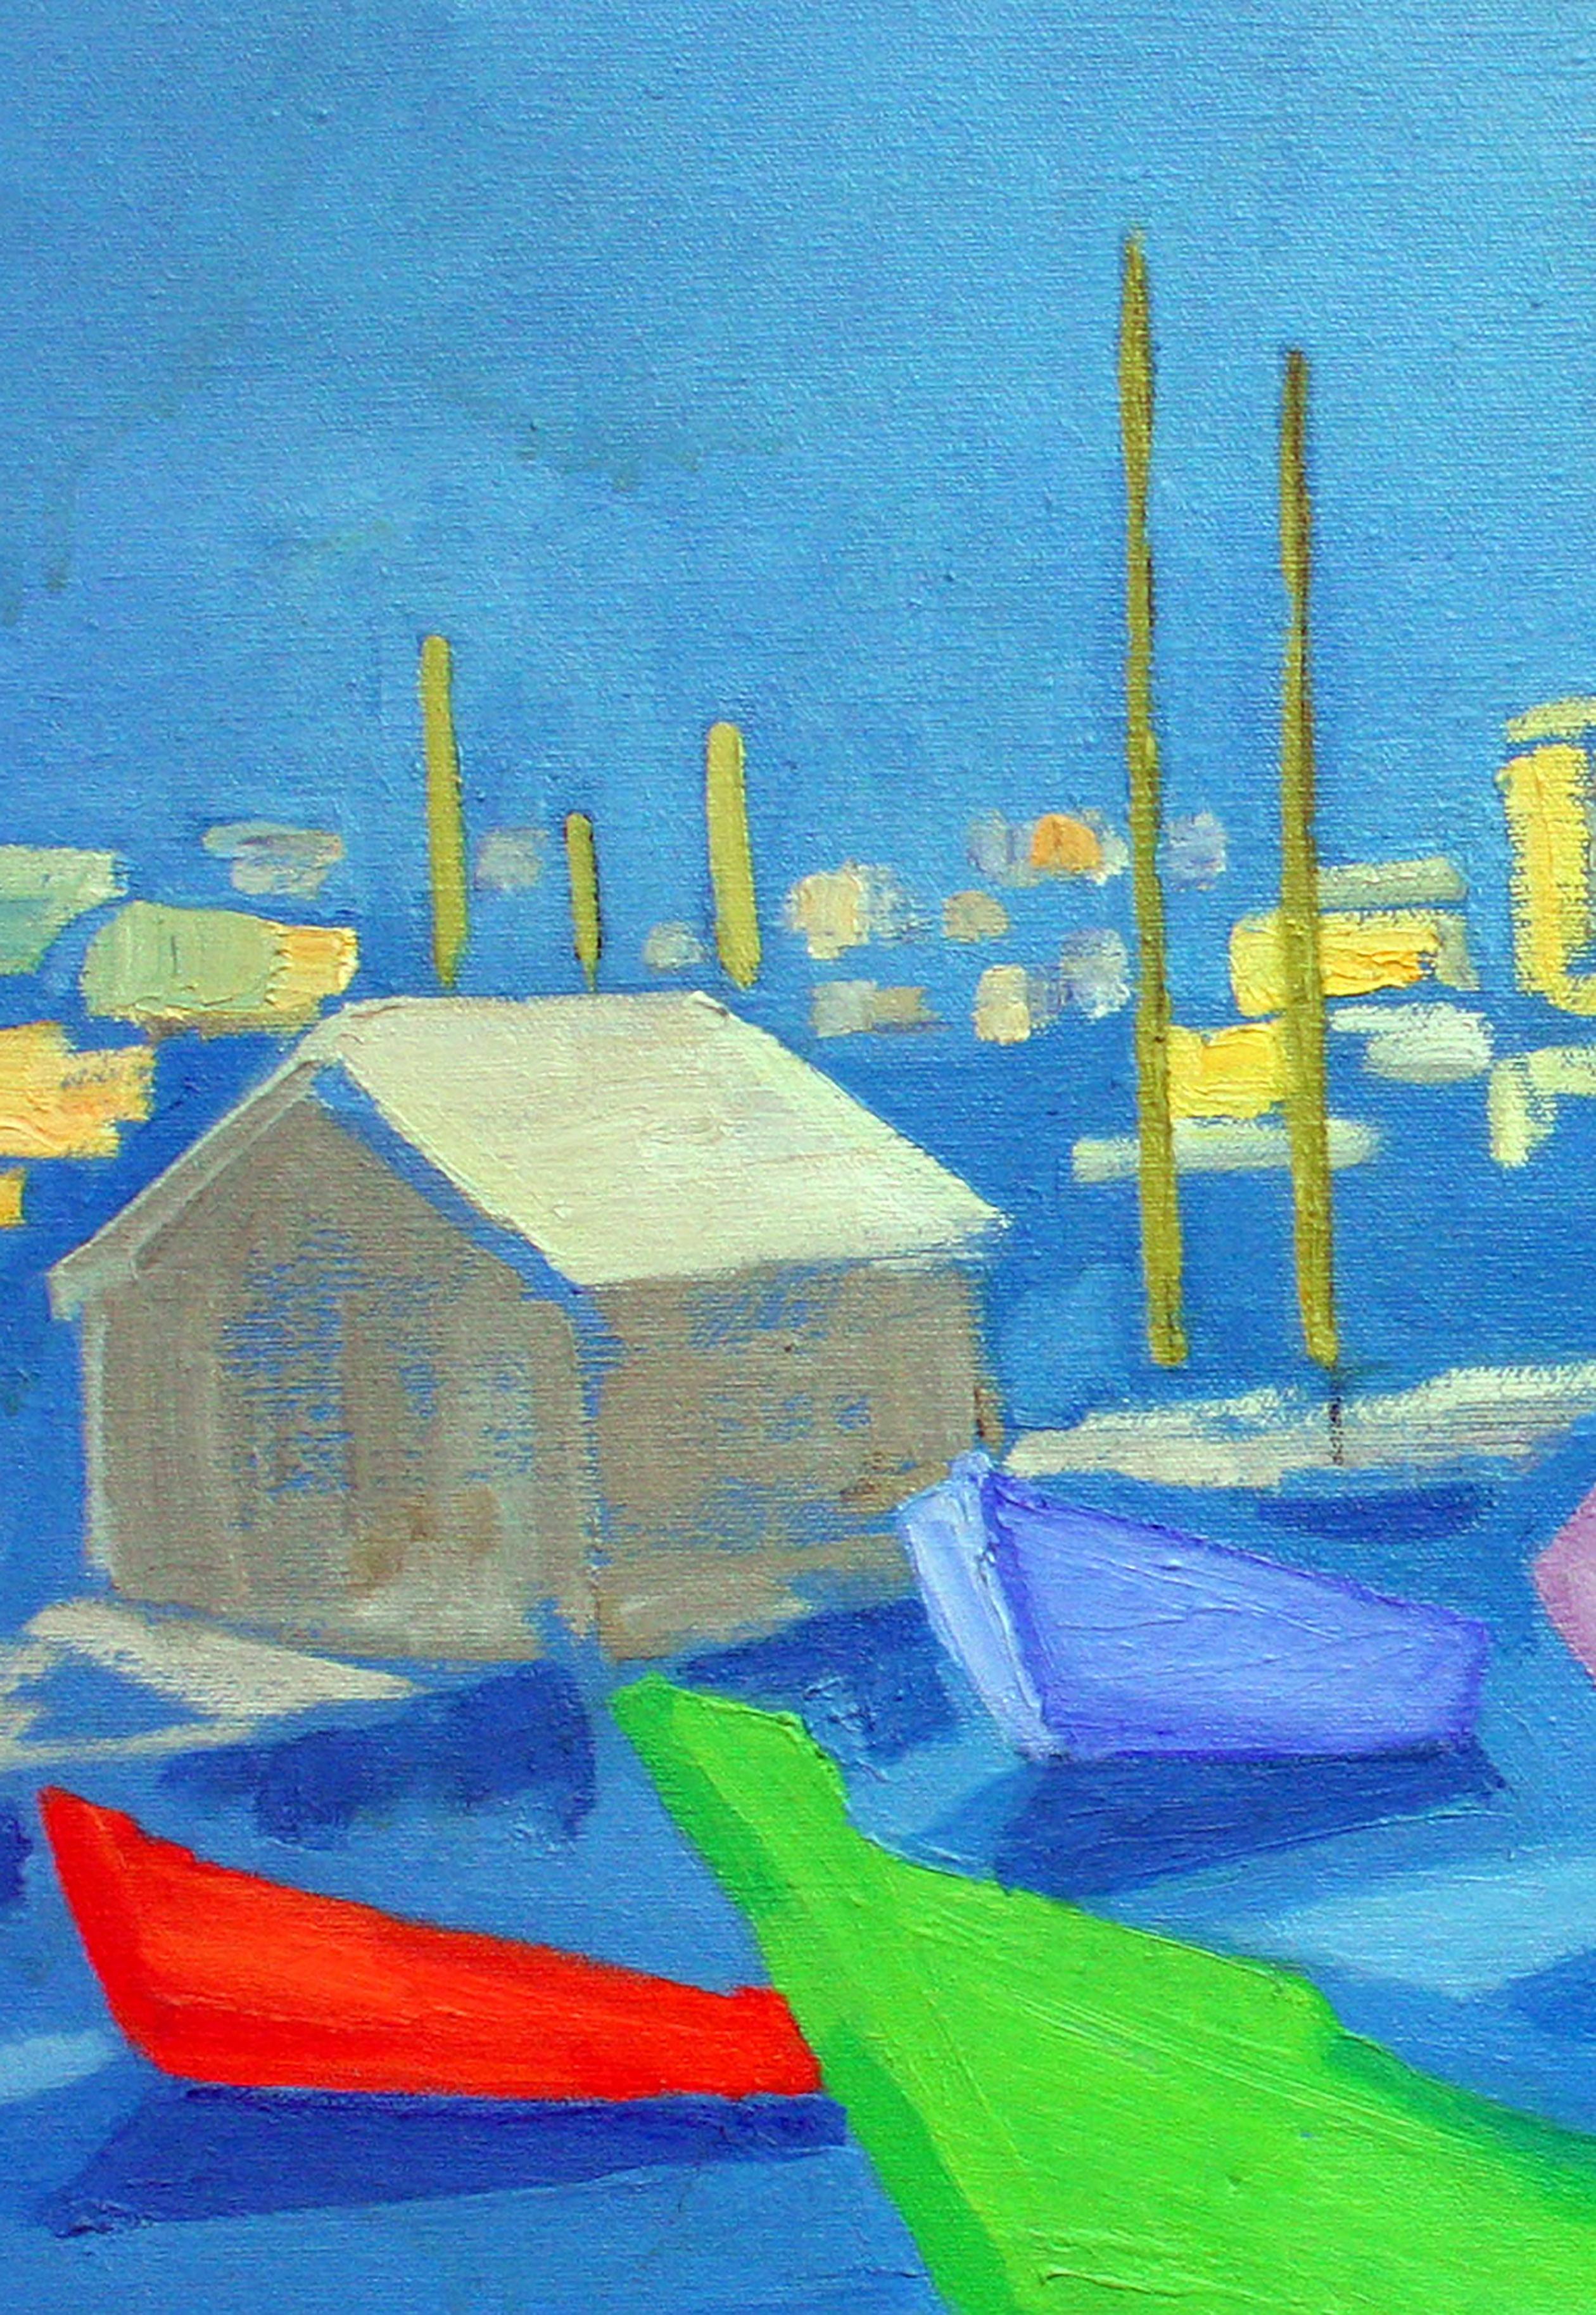 Modernist Boats - Abstract Monterey Seascape in Oil on Canvas - Abstract Impressionist Painting by Virginia Rogers